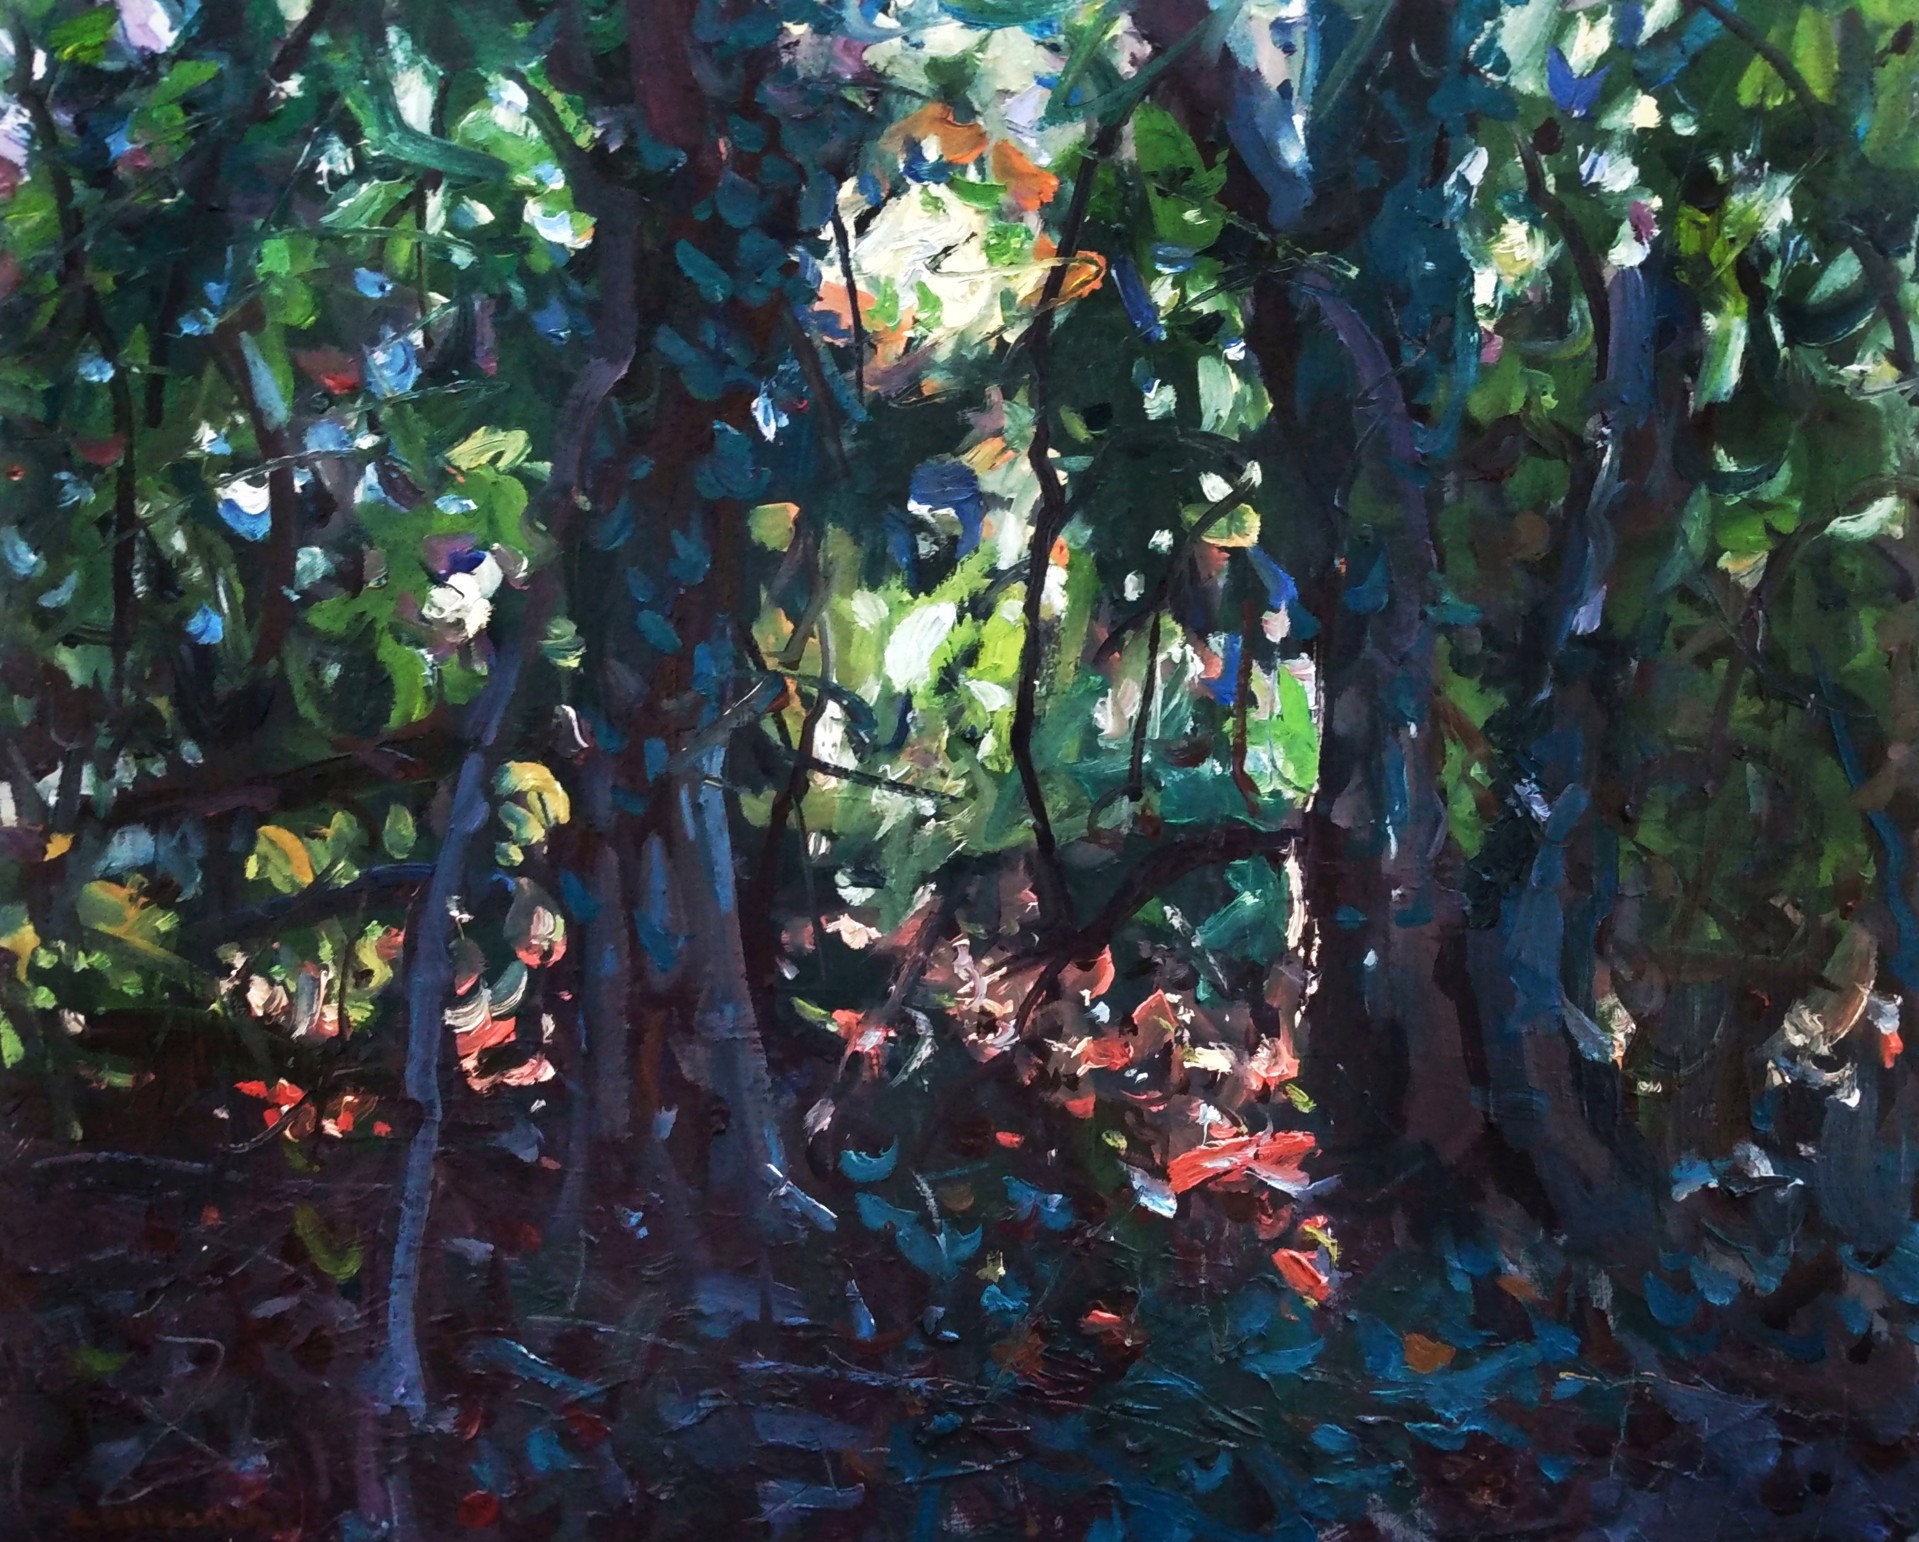 "Forest Guardians" original oil painting by Kyle Buckland